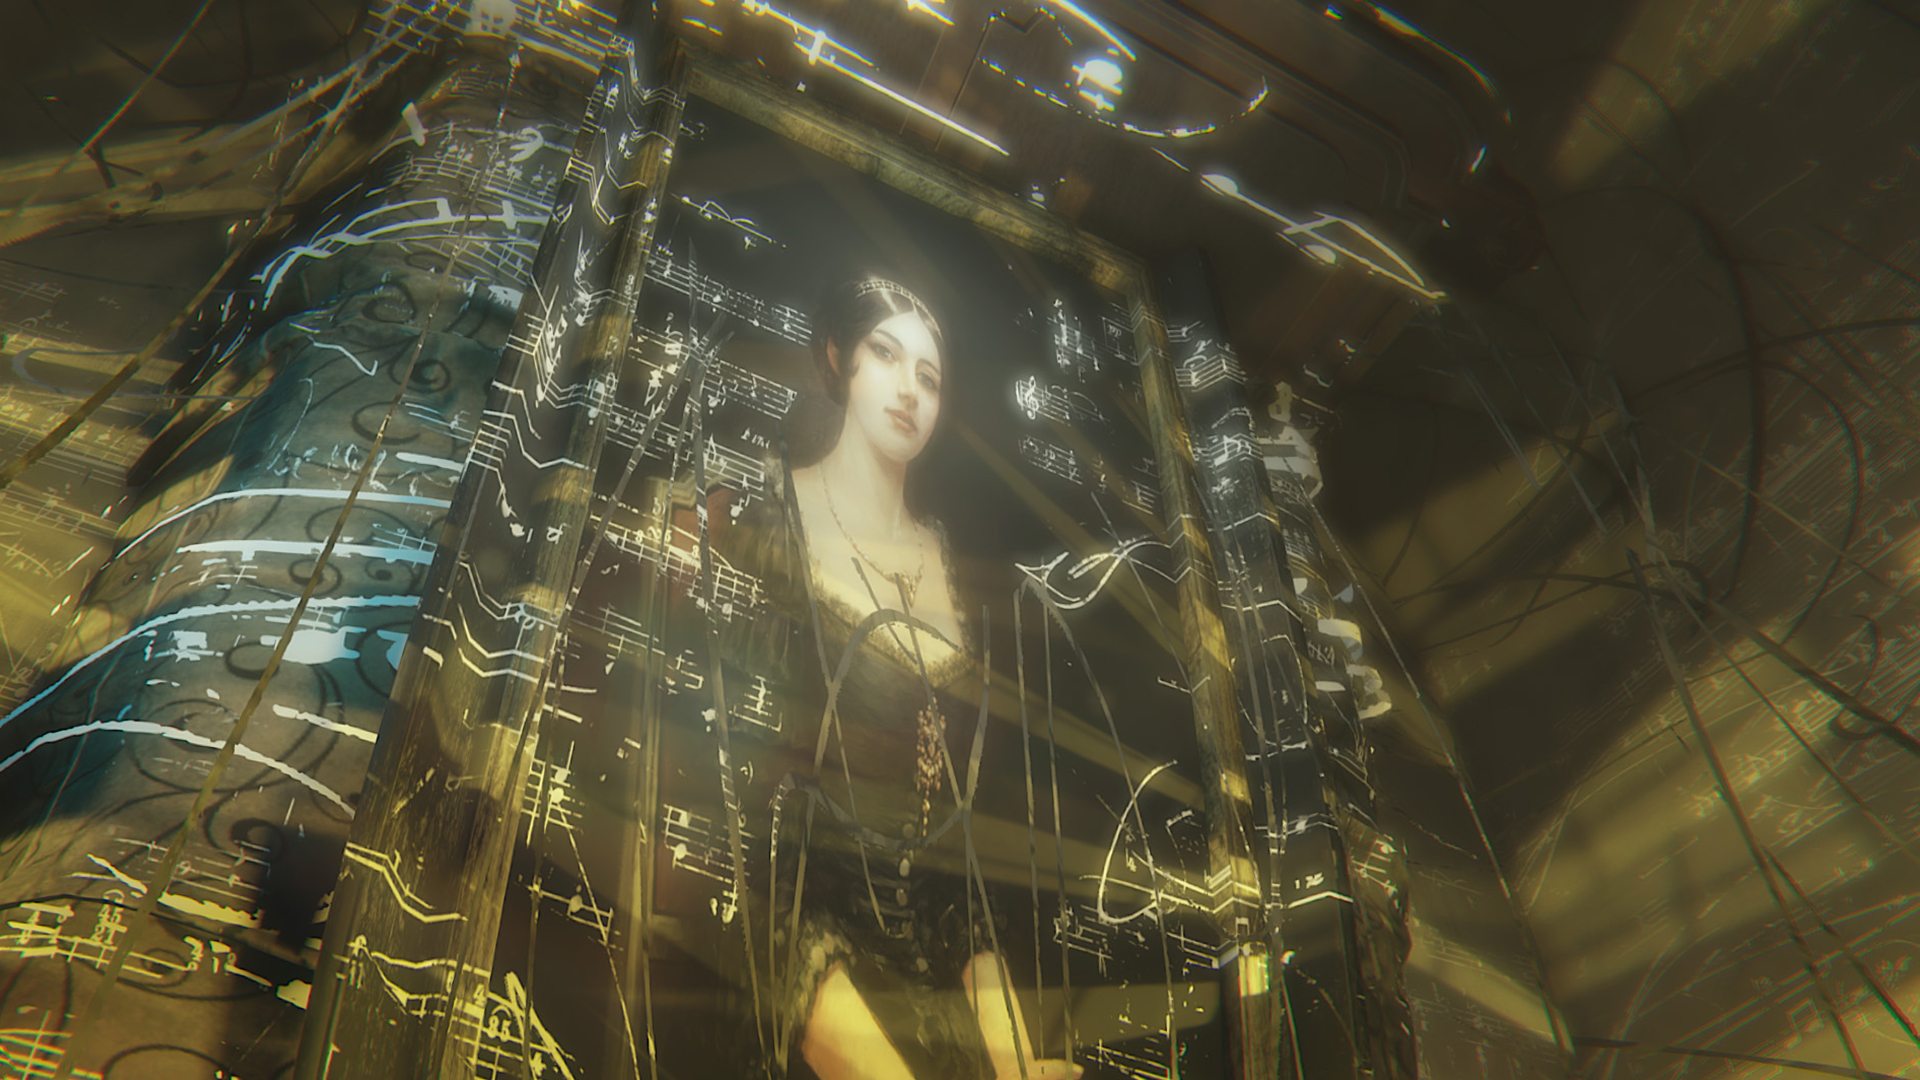 Layers of Fear: Inheritance Free Download (v1.1.1) « IGGGAMES